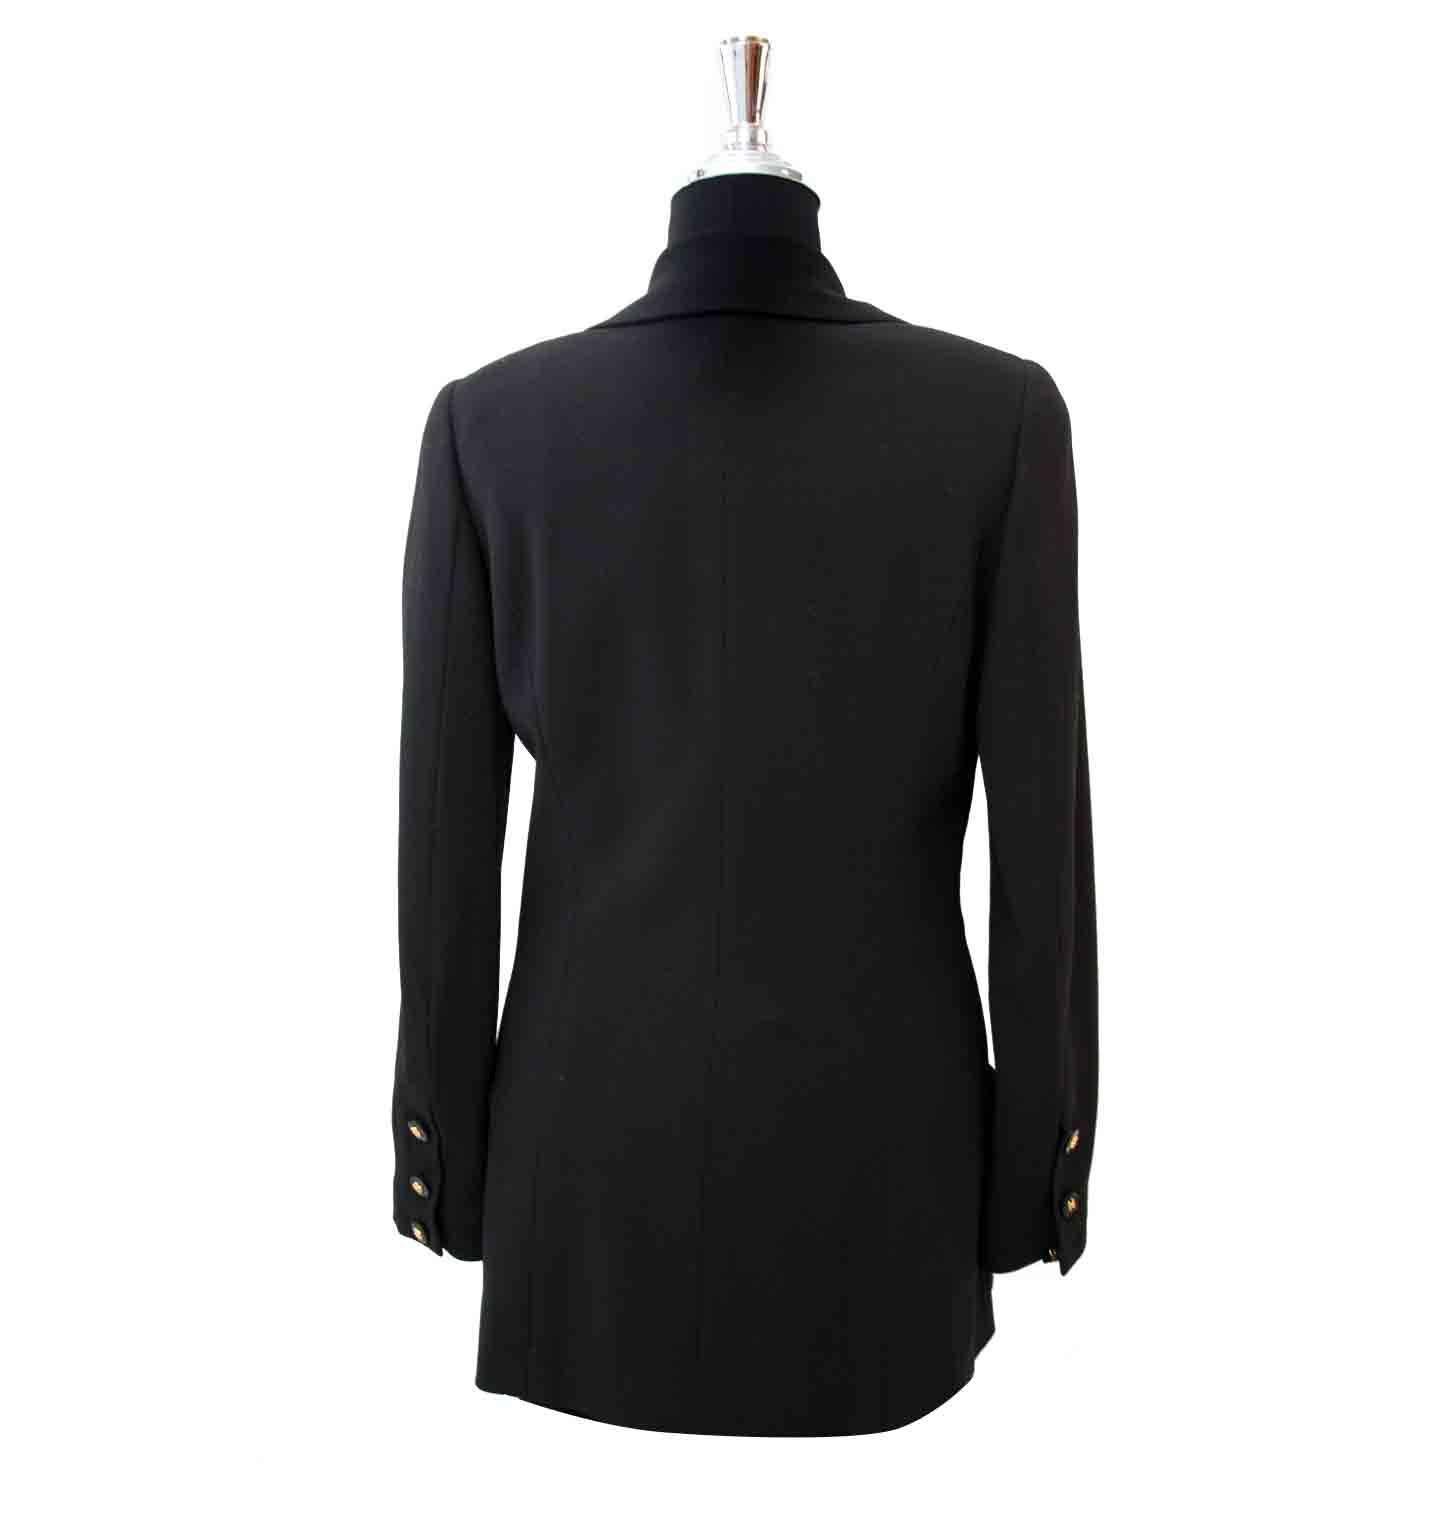 As new, excellent condition

Chanel Black Woolen Blazer - Size: 38

This classic design of Chanel is a musthave in your closet.
Crafted out of 97% Wool and 3% nylon with a silk interior lining.
The beautiful detailed gold-toned buttons are finished